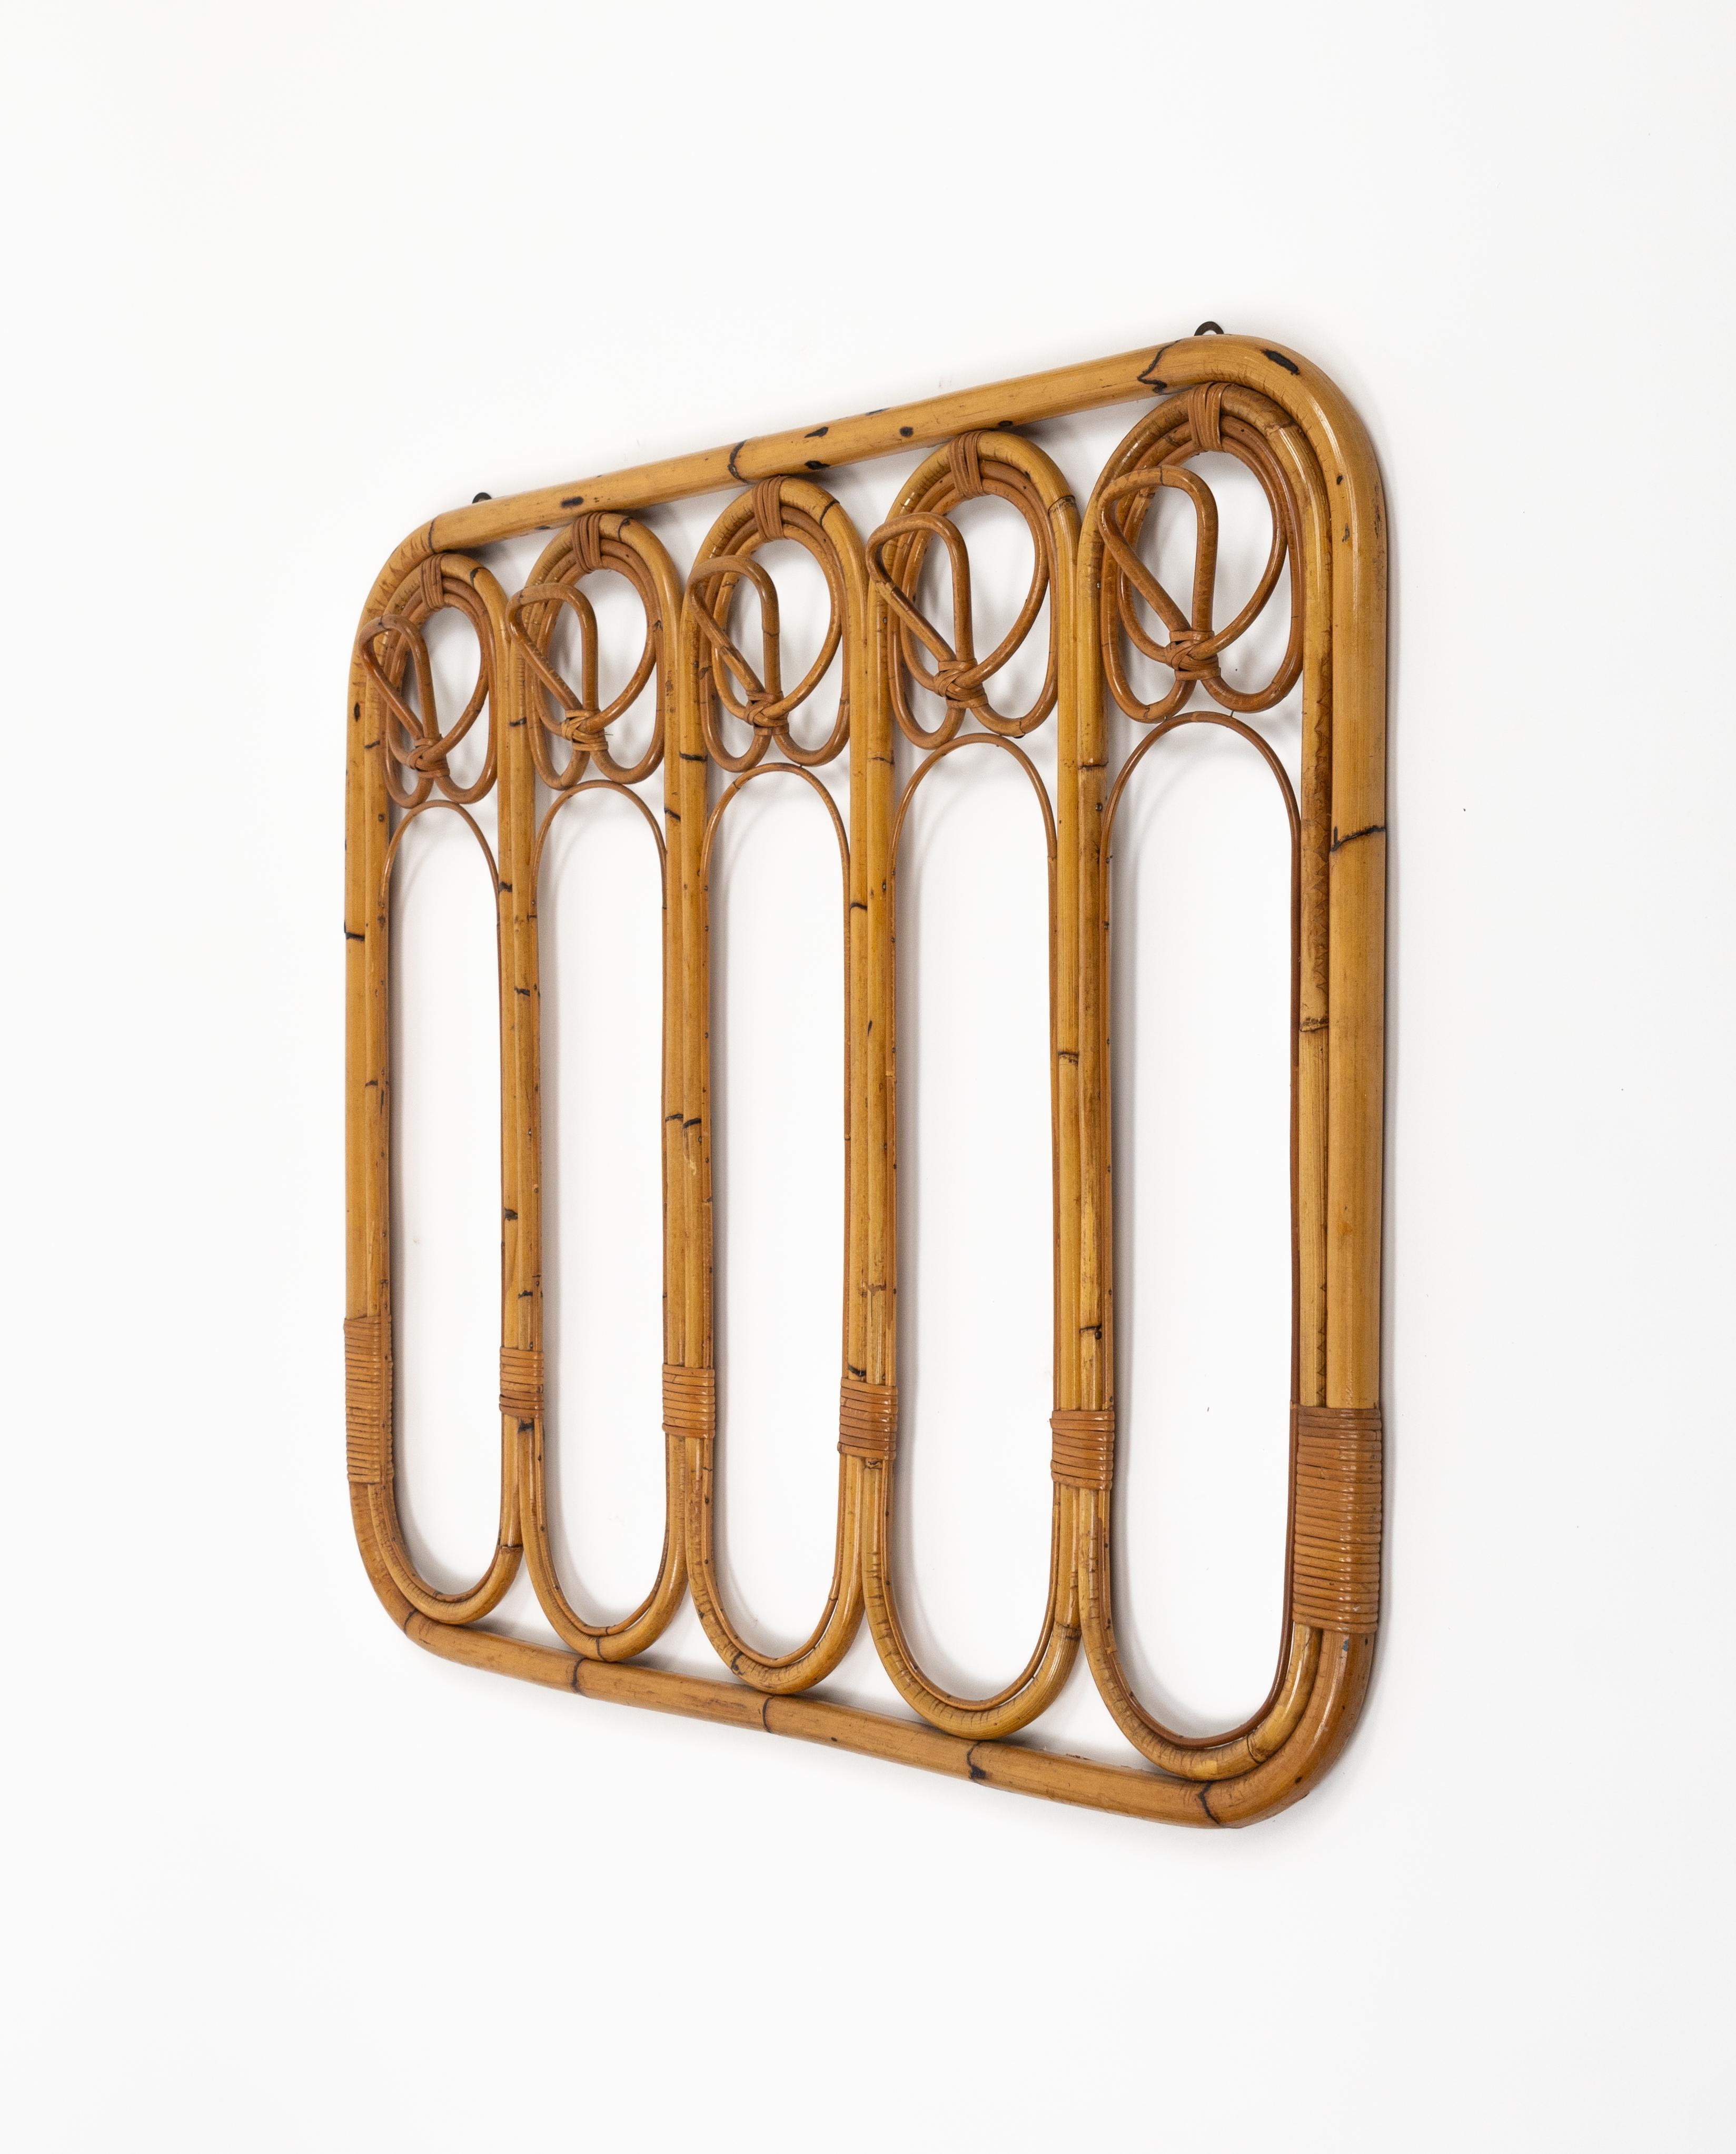 Midcentury Bamboo and Rattan Coat Rack Stand, Italy 1960s For Sale 3